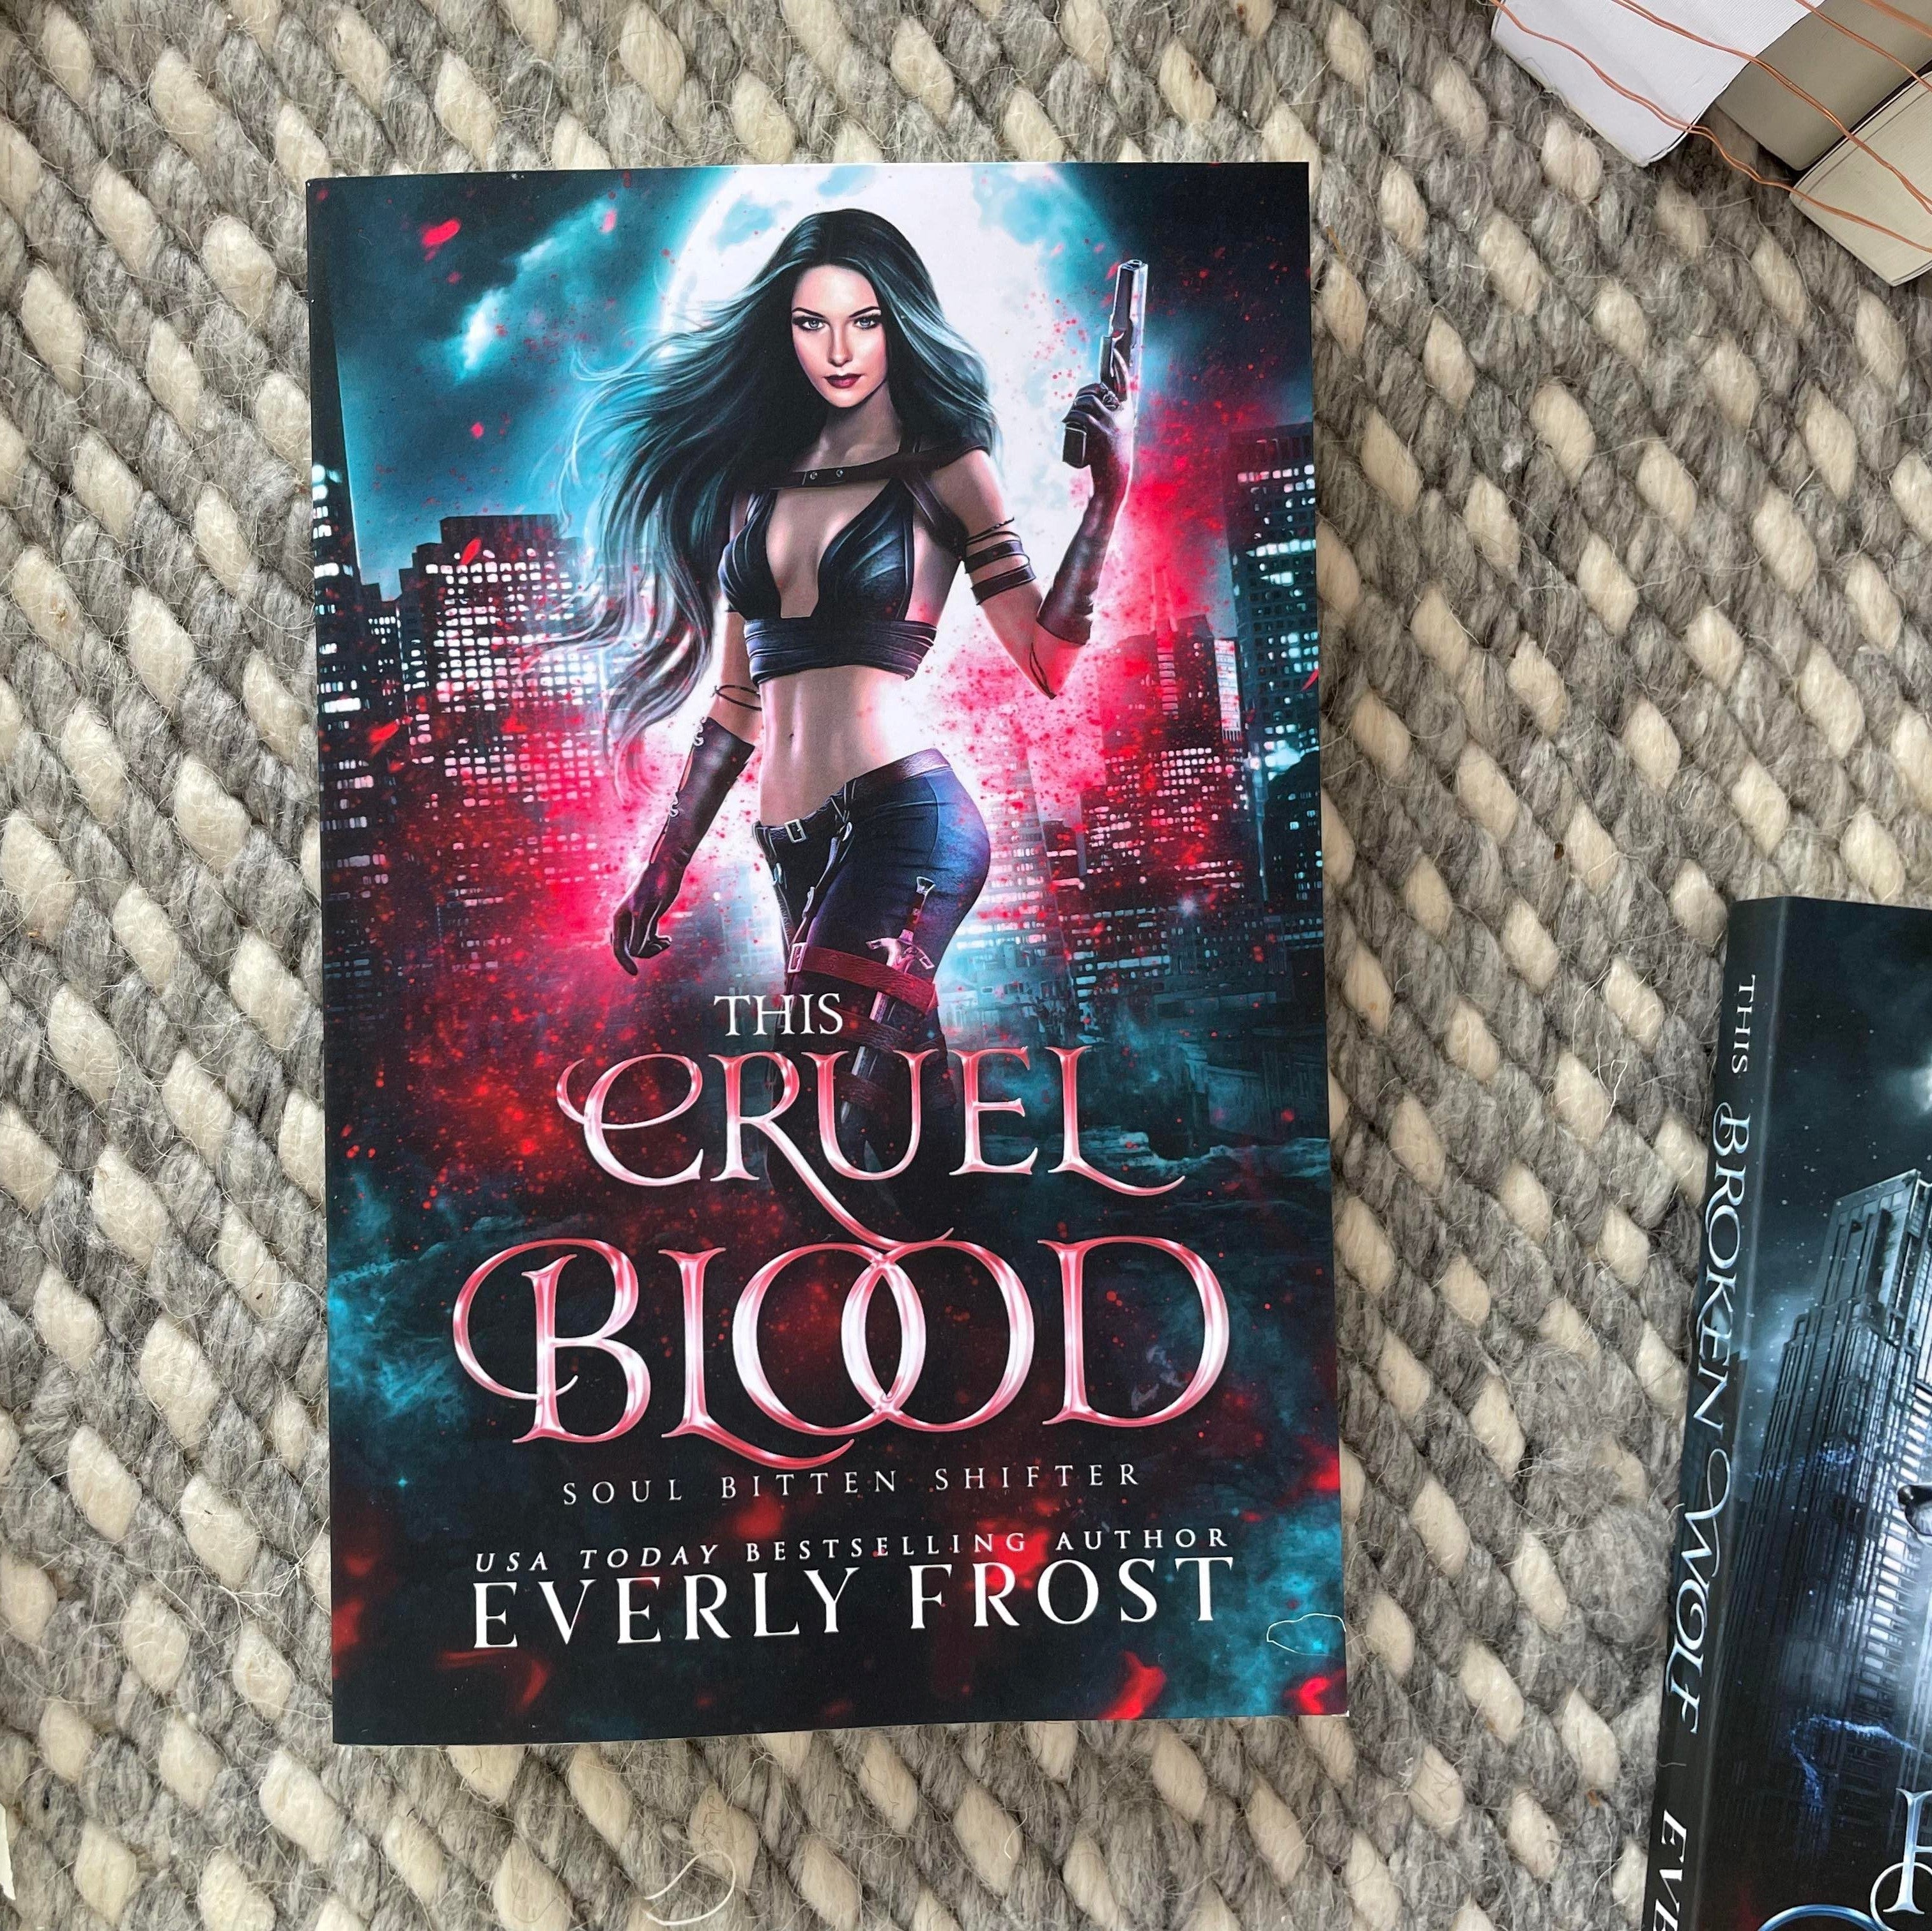 Soul Bitten Shifter series by Everly Frost